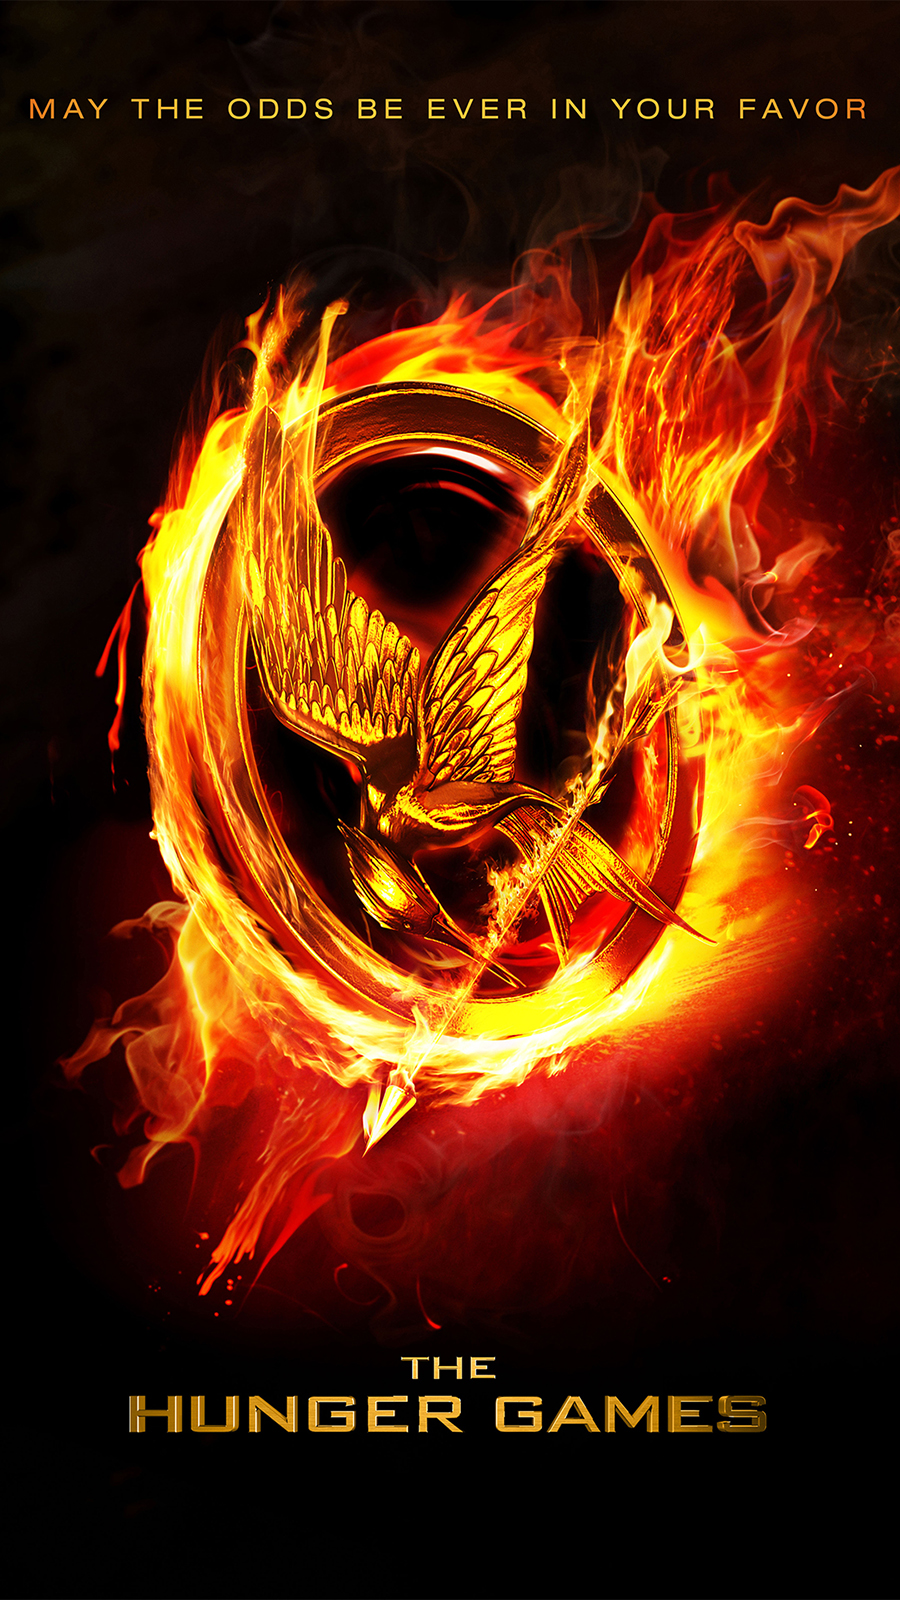 The Hunger Games: Catching Fire for android instal